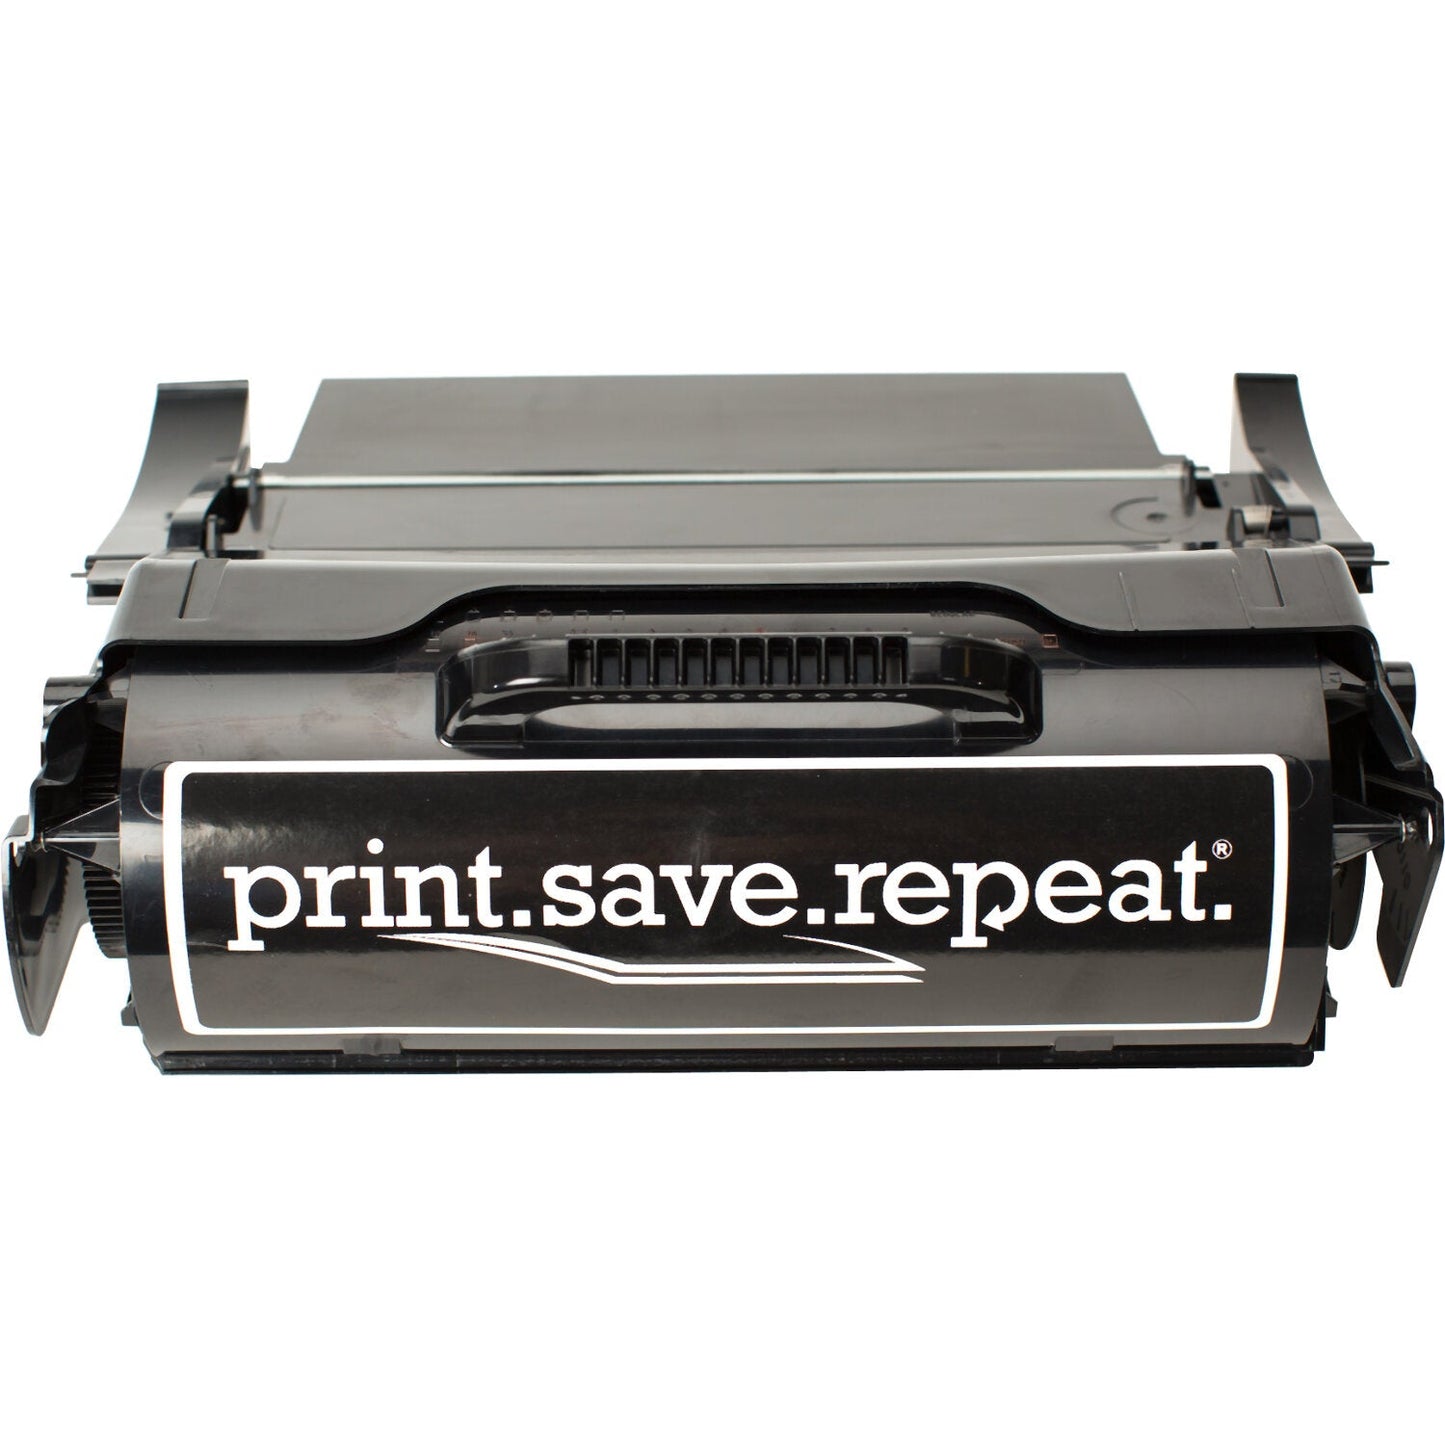 Print.Save.Repeat. Lexmark 24B5875 High Yield Remanufactured Toner Cartridge for XS651, XS652, XS654, XS658 [30,000 Pages]